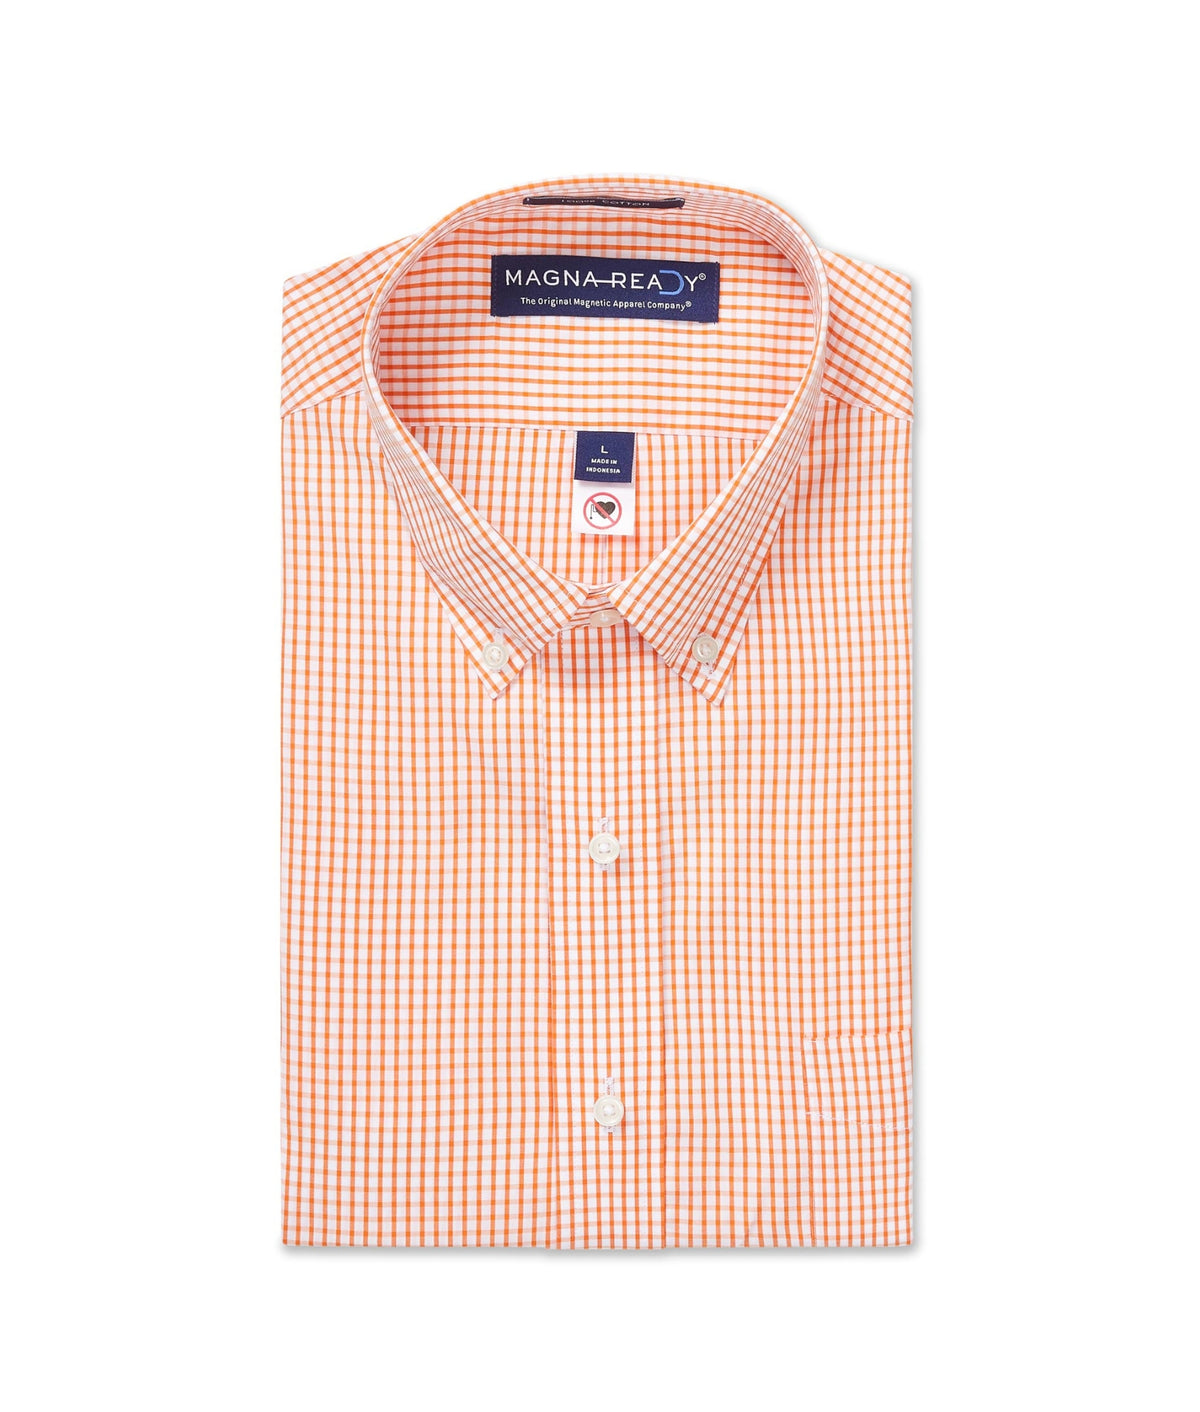 Long Sleeve Orange and White Classic Button Down Collar Plaid Shirt with Magnetic Closures